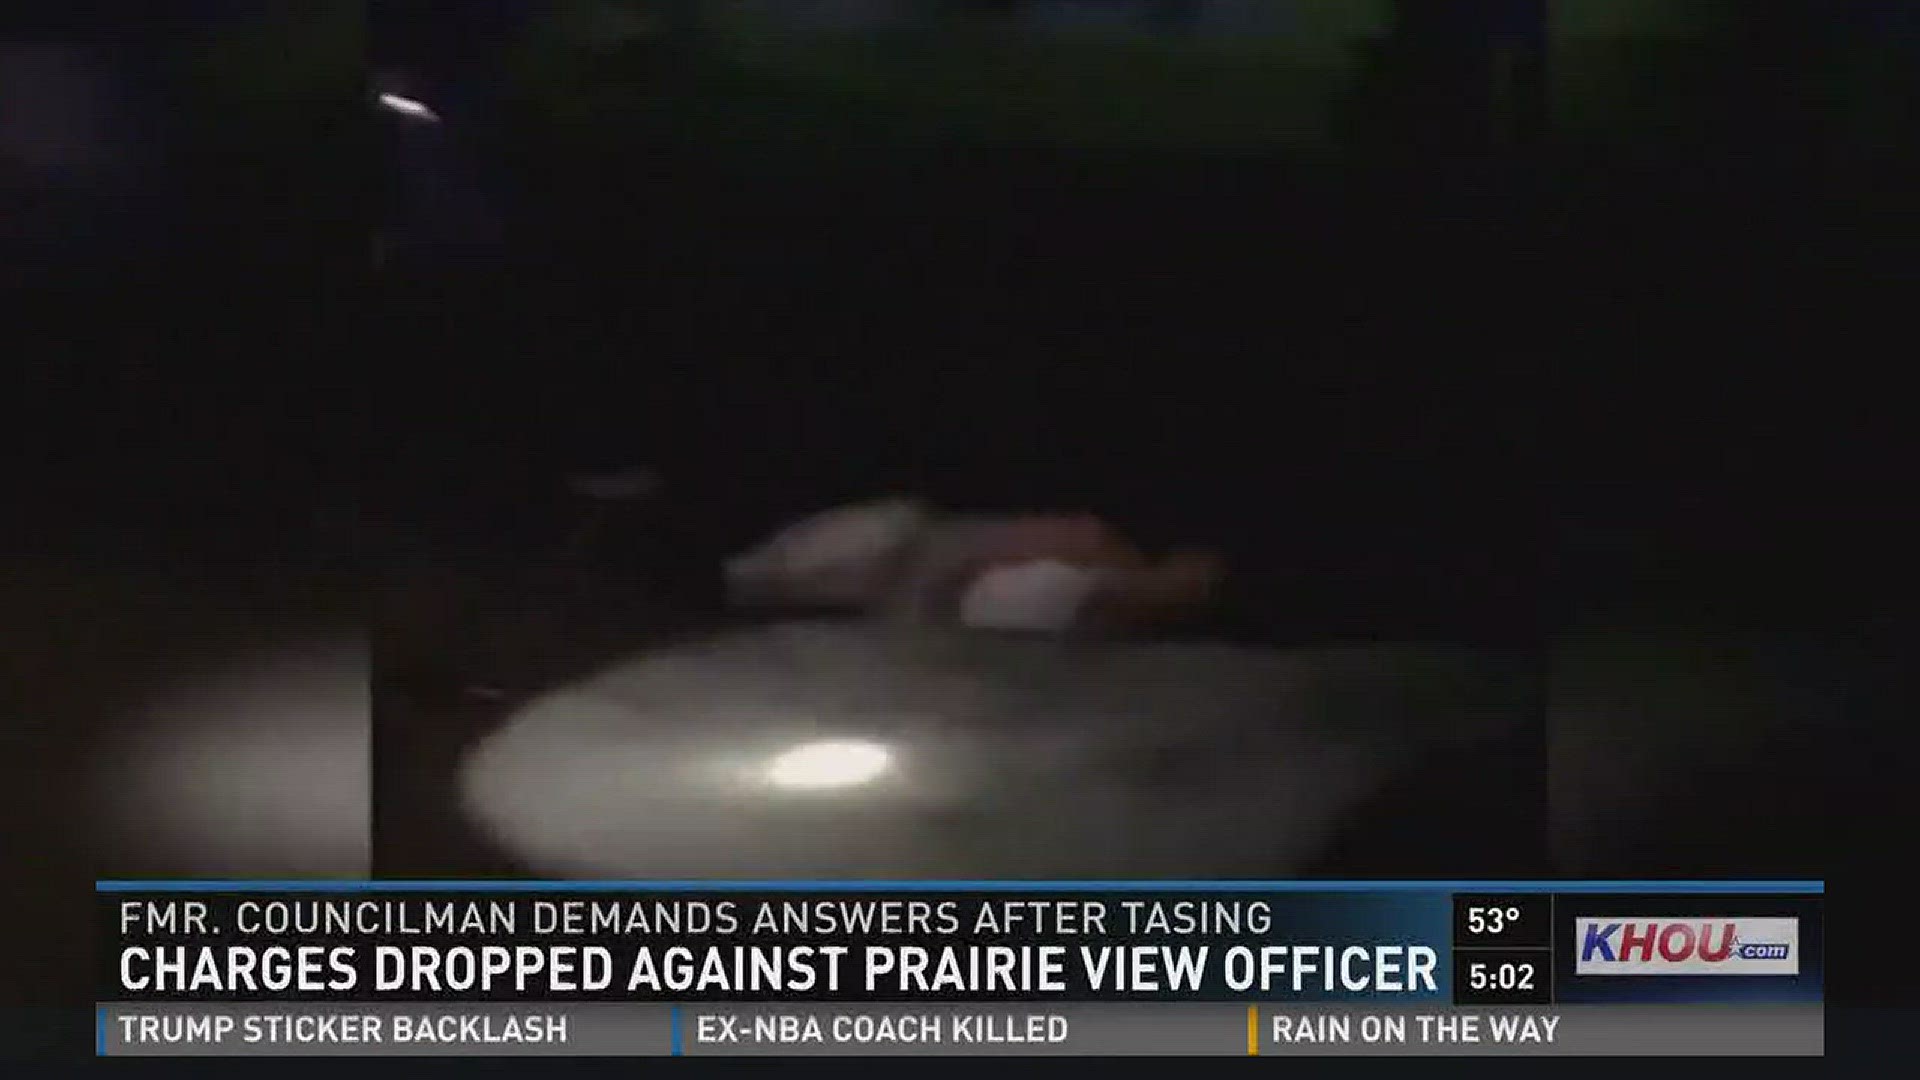 Charges were dropped against a Prairie View officer who allegedly used a Taser on a former councilman.